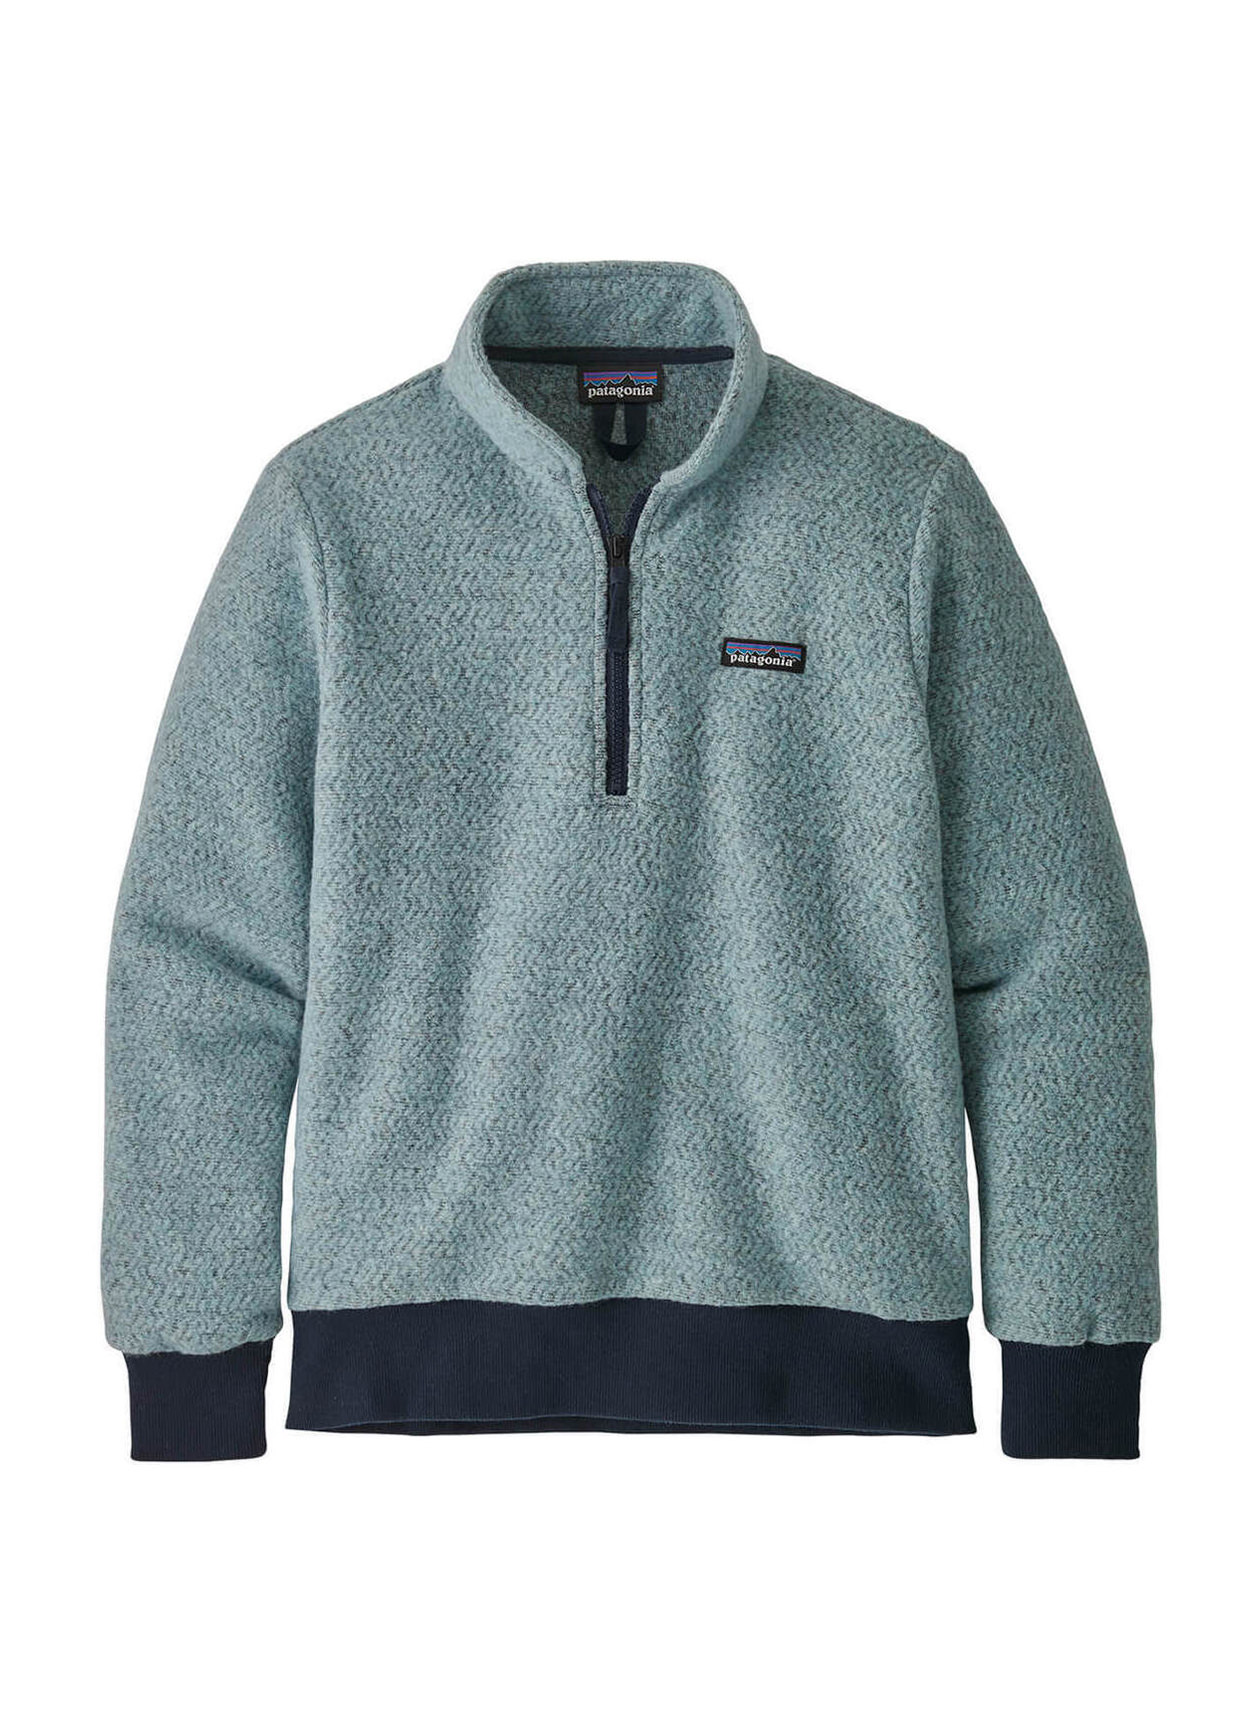 Patagonia Dell Foxit Women's Fleece Size Small – Yesterday's Attic